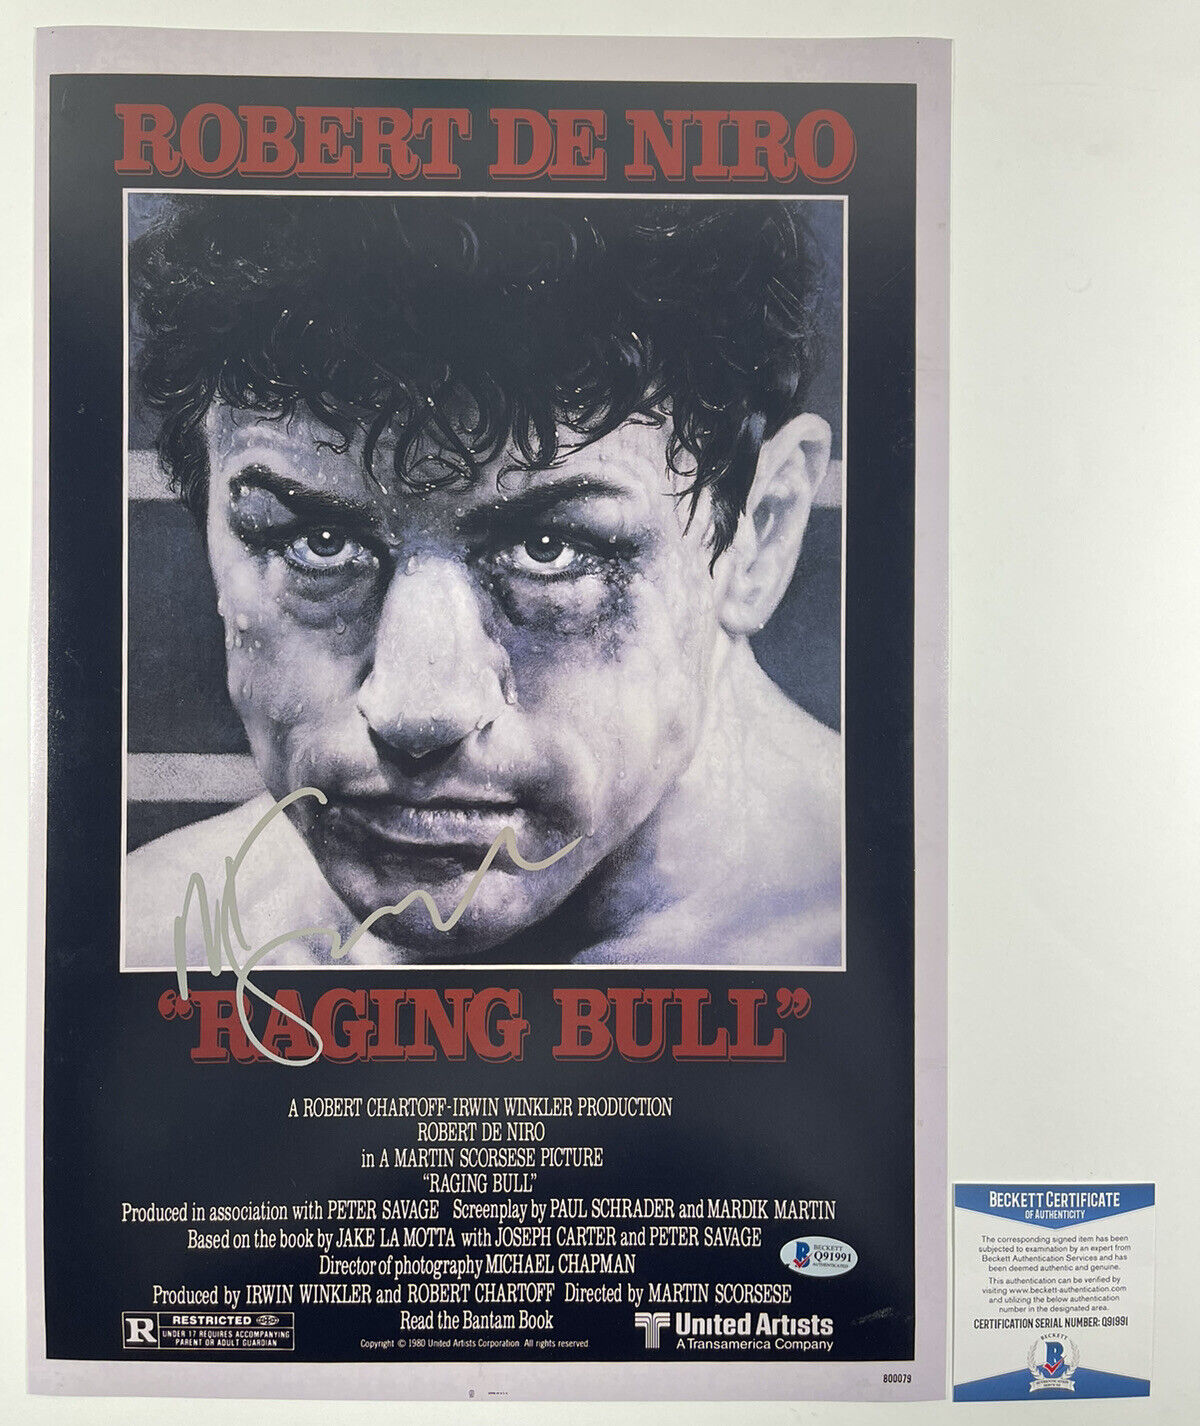 MARTIN SCORSESE SIGNED RAGING BULL 12x18 Photo Poster painting MOVIE POSTER BAS COA #Q91991